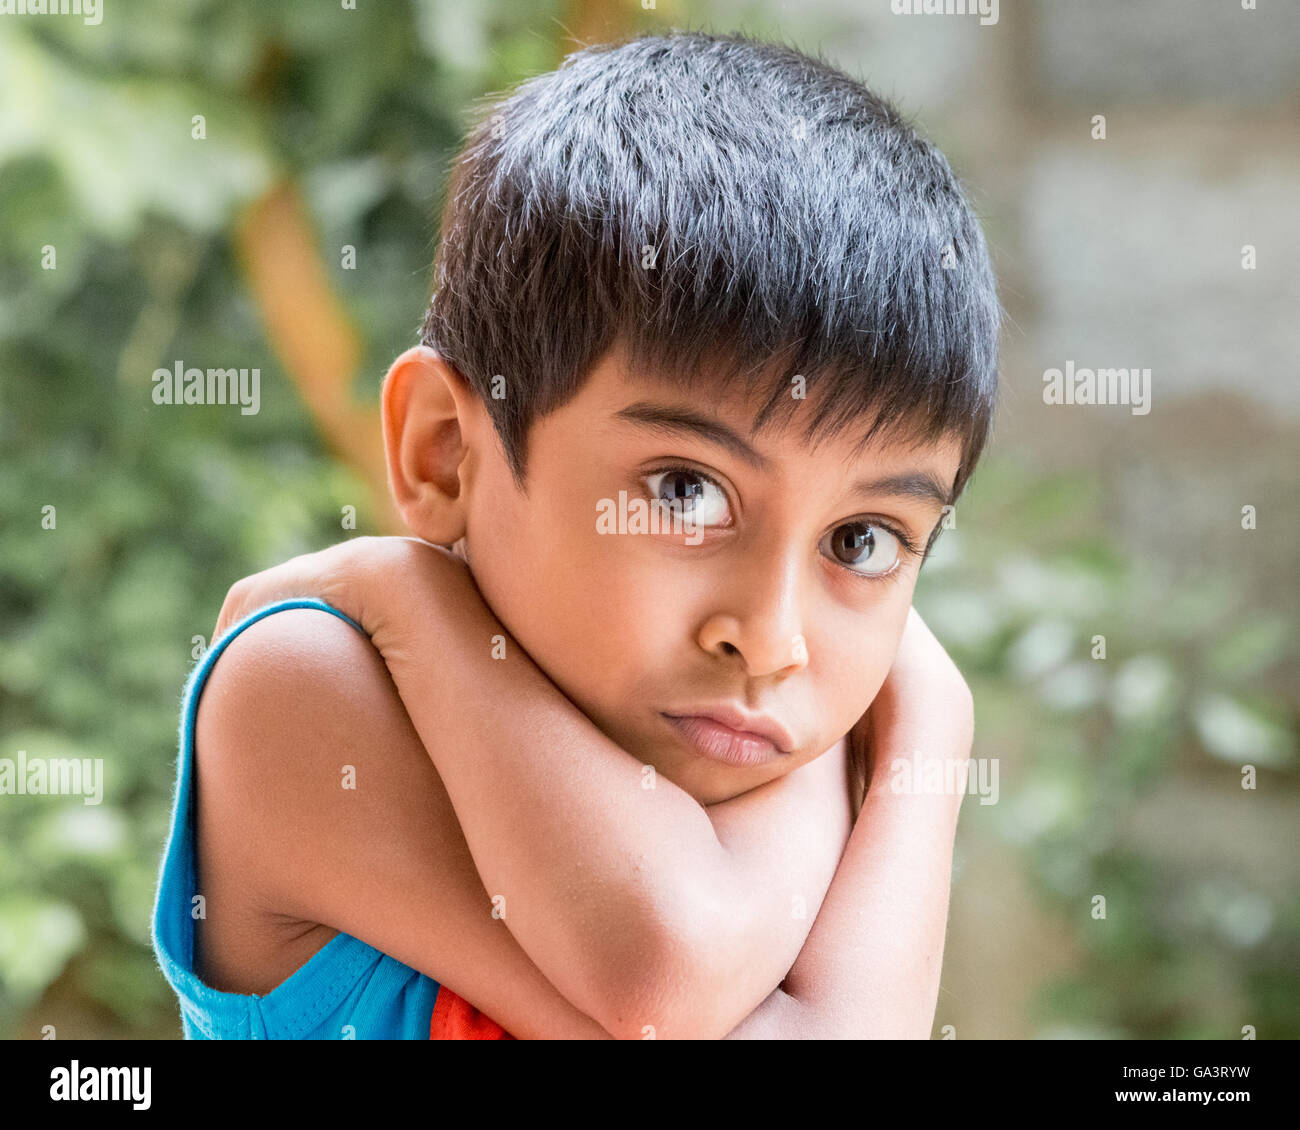 Kid showing emotions of sadness, fear and stress Stock Photo